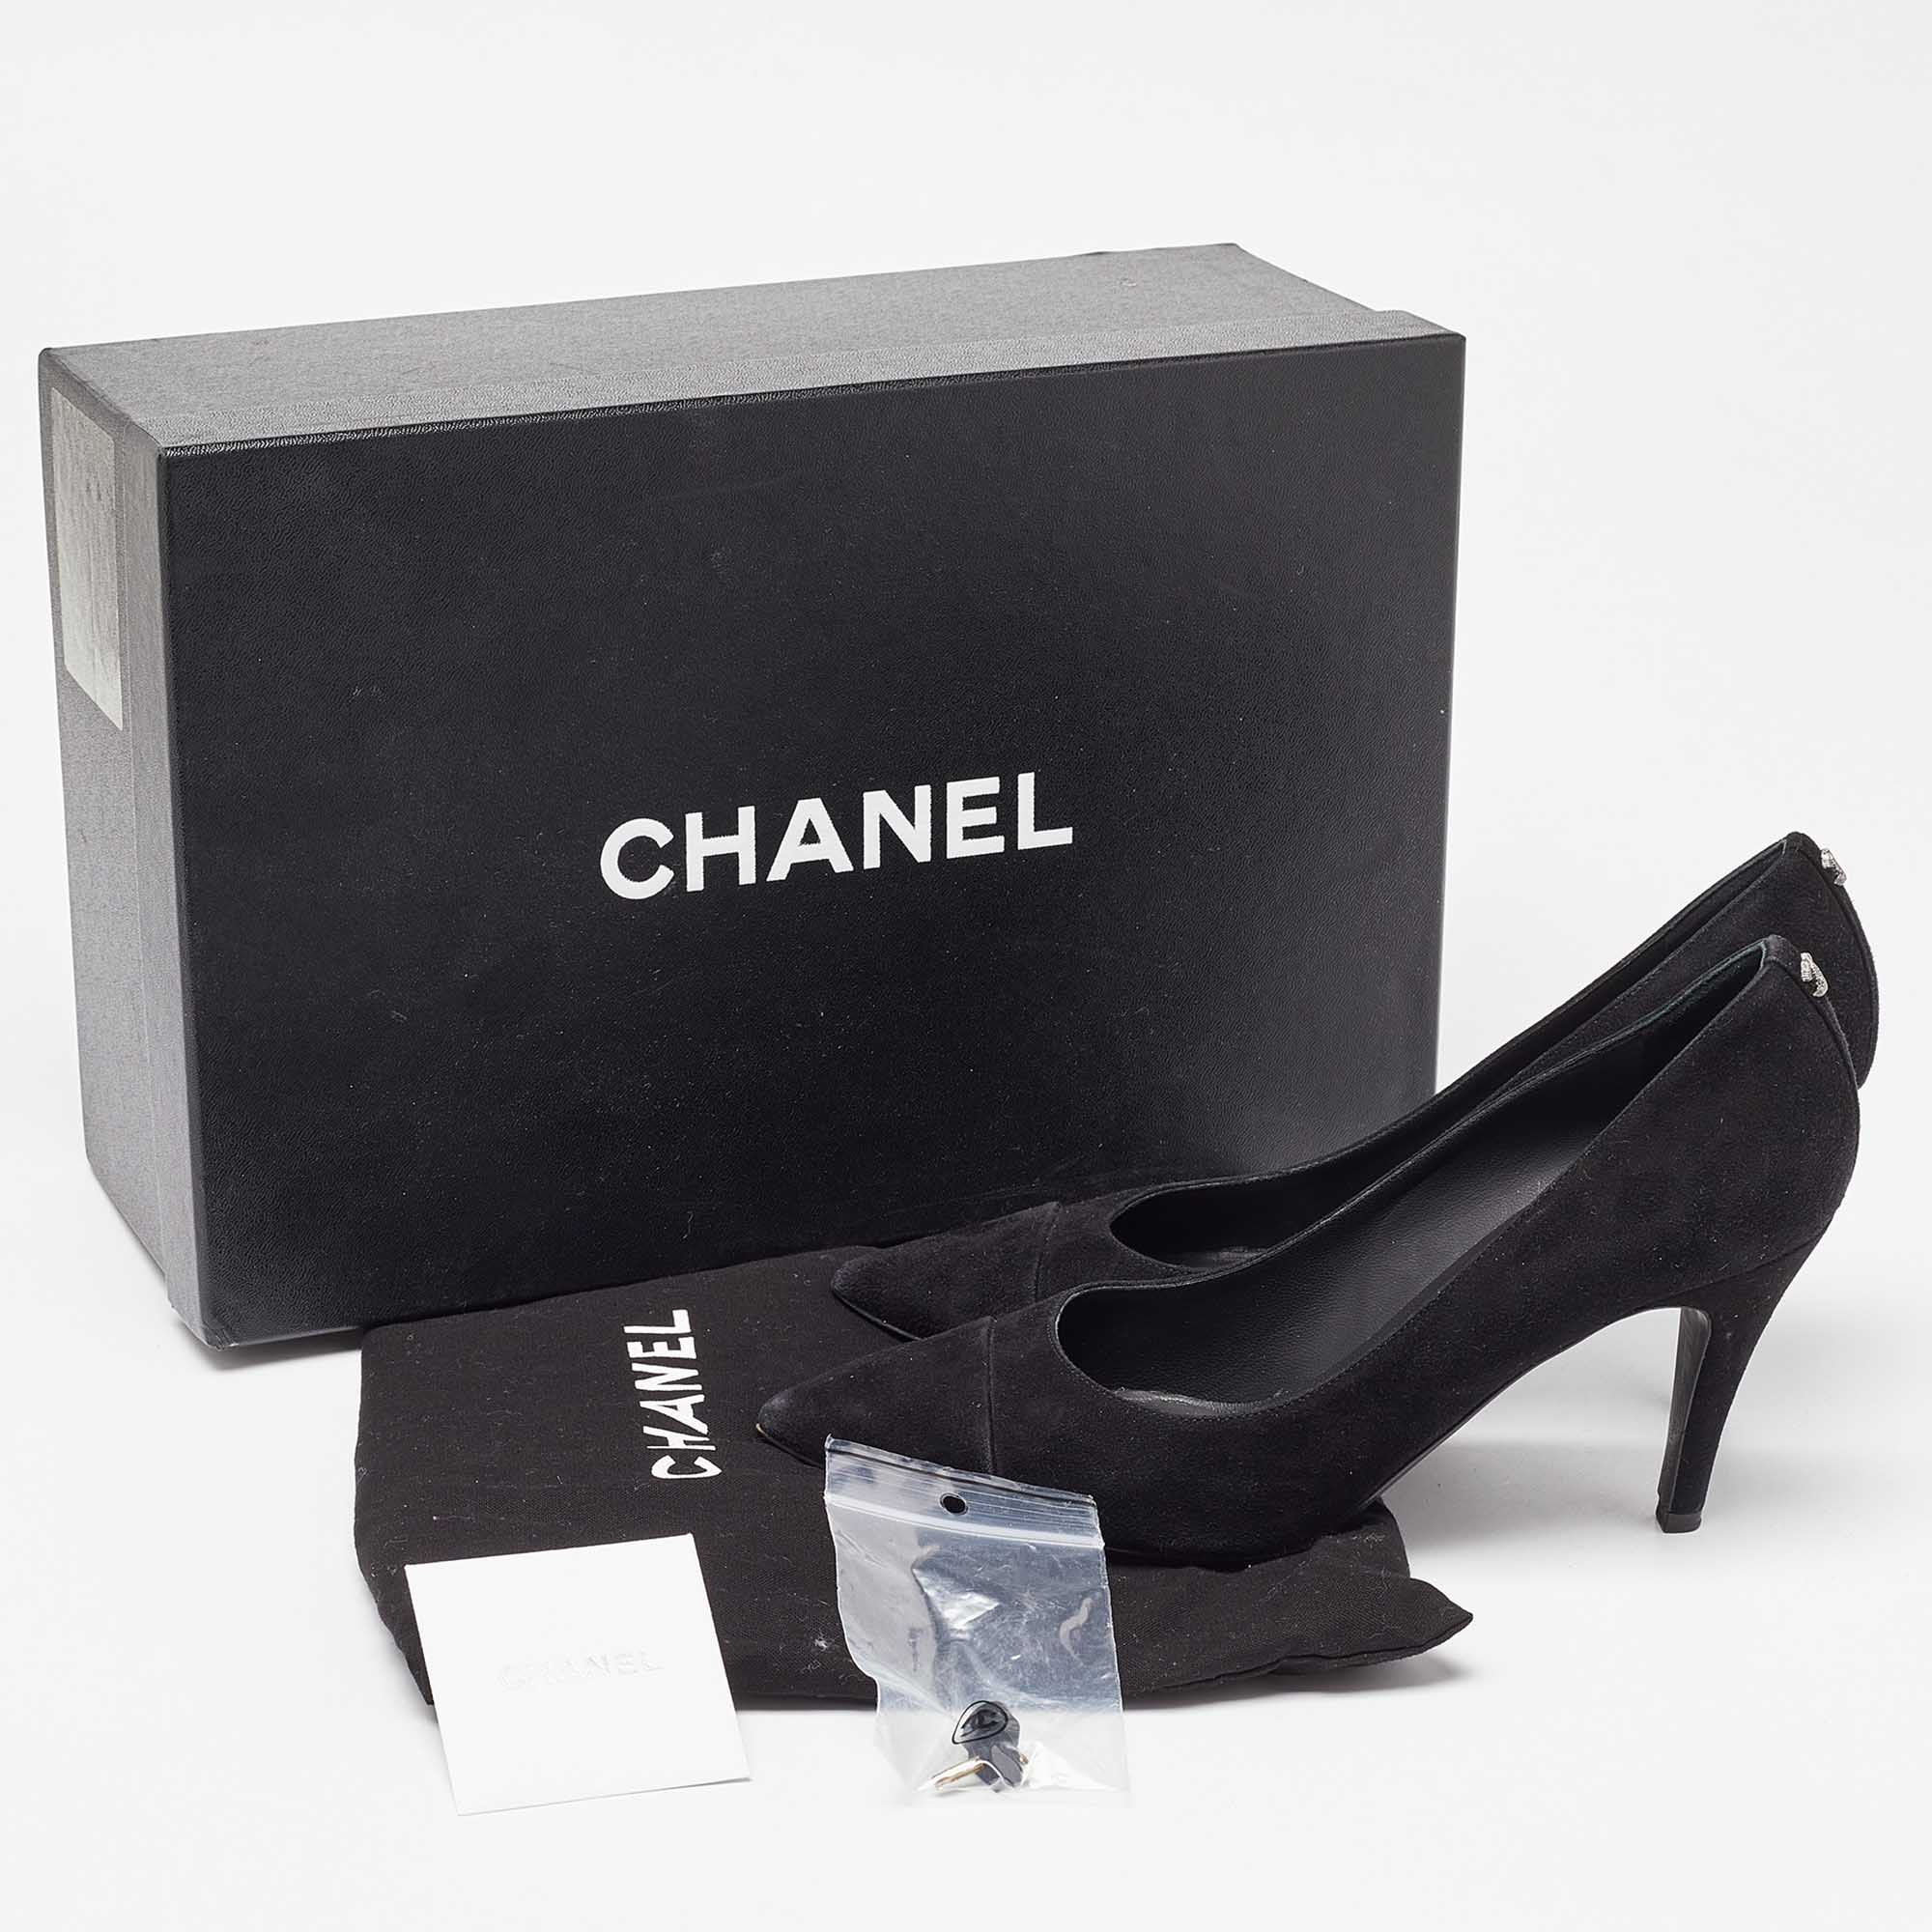 Chanel Black Suede Cap Toe Pointed Pumps Size 37.5